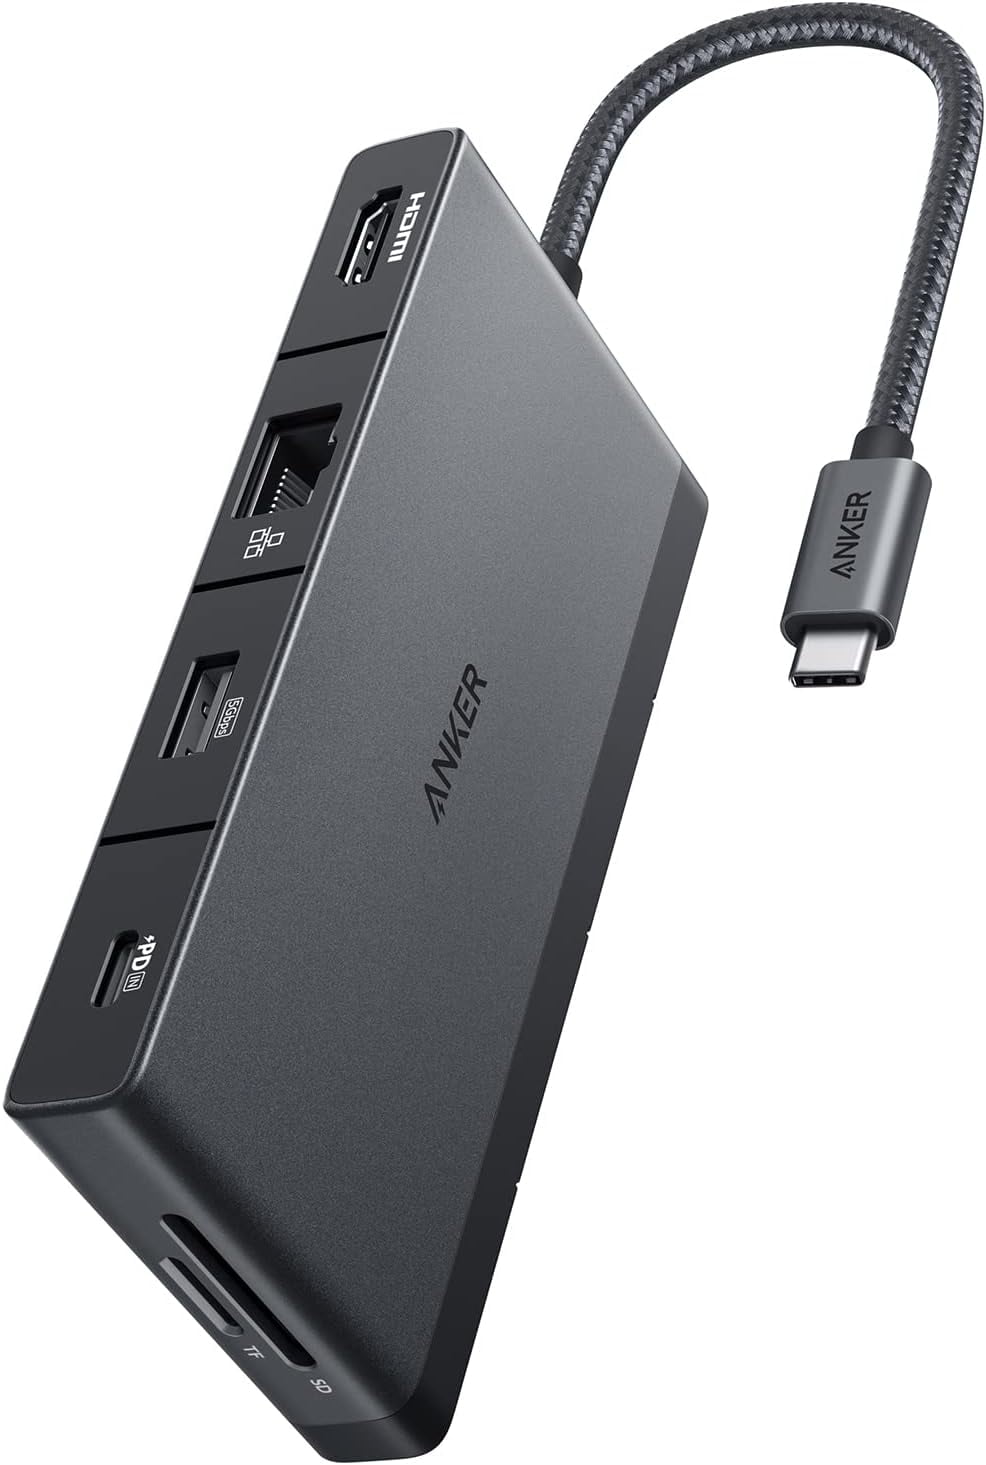 Anker 552 9-in-1 USB Hub w/ 100W PD, USB Ports, 4K HDMI, Ethernet SD Reader $30 Free Shipping w/ Prime or on $35